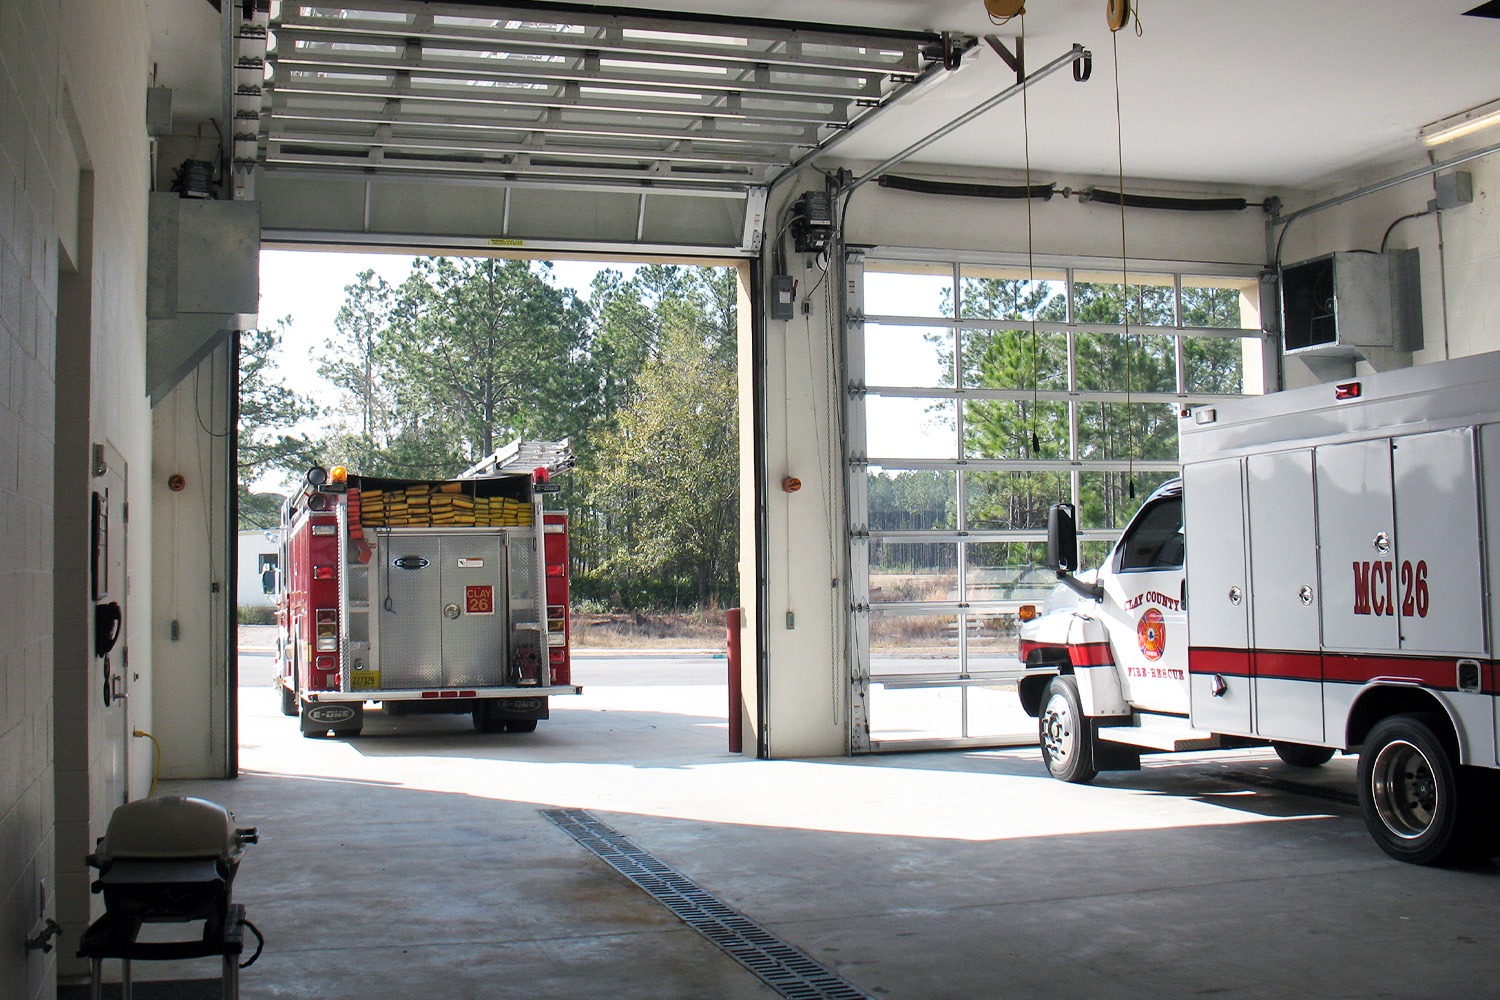 Interior view of the apparatus bay with a fire truck and rescue vehicle